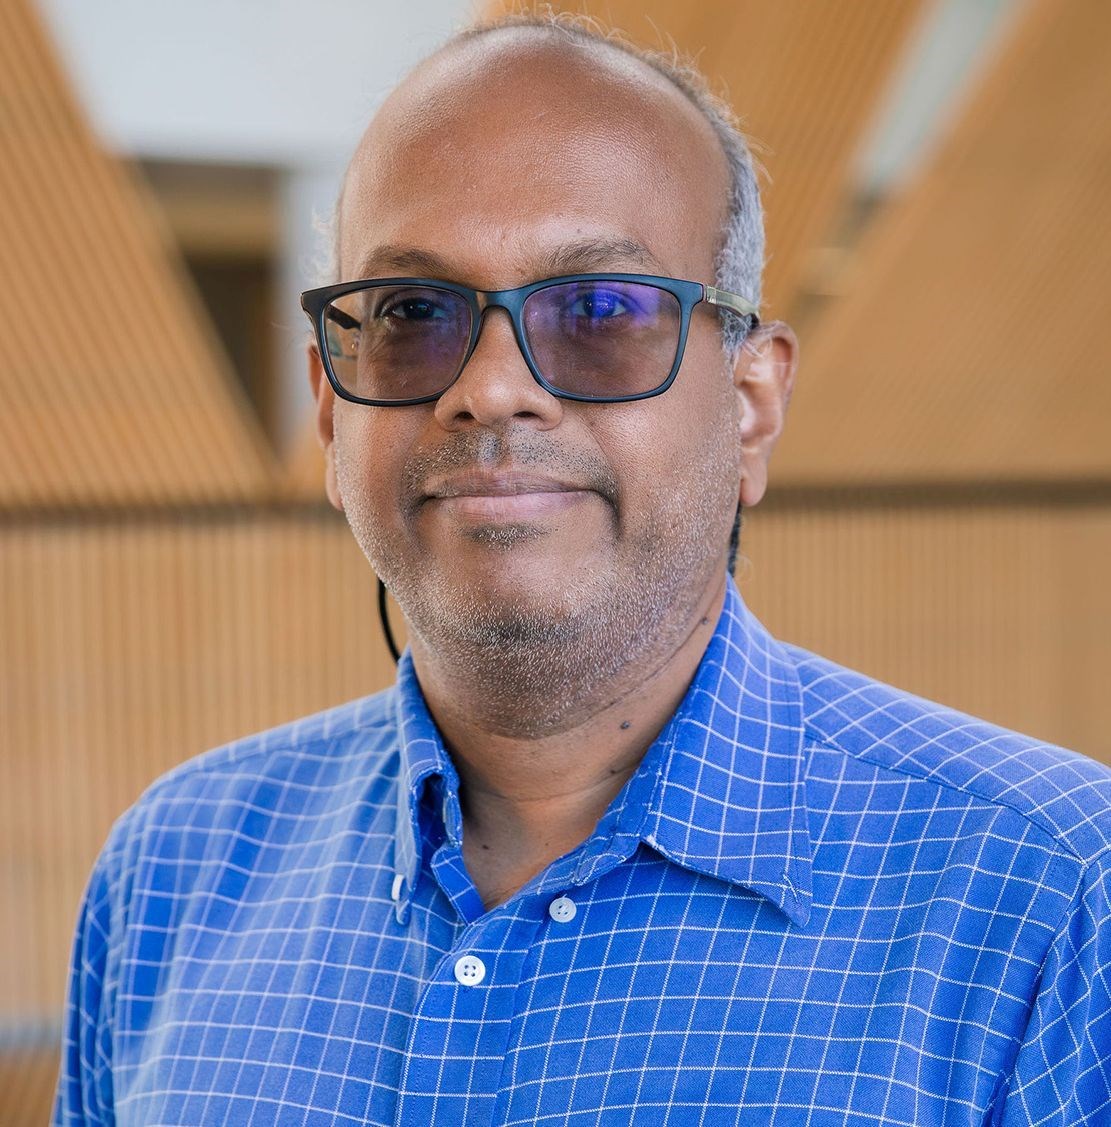 Suri Iyer wearing a blue striped collared shirt and darkened glasses and looking at the camera.